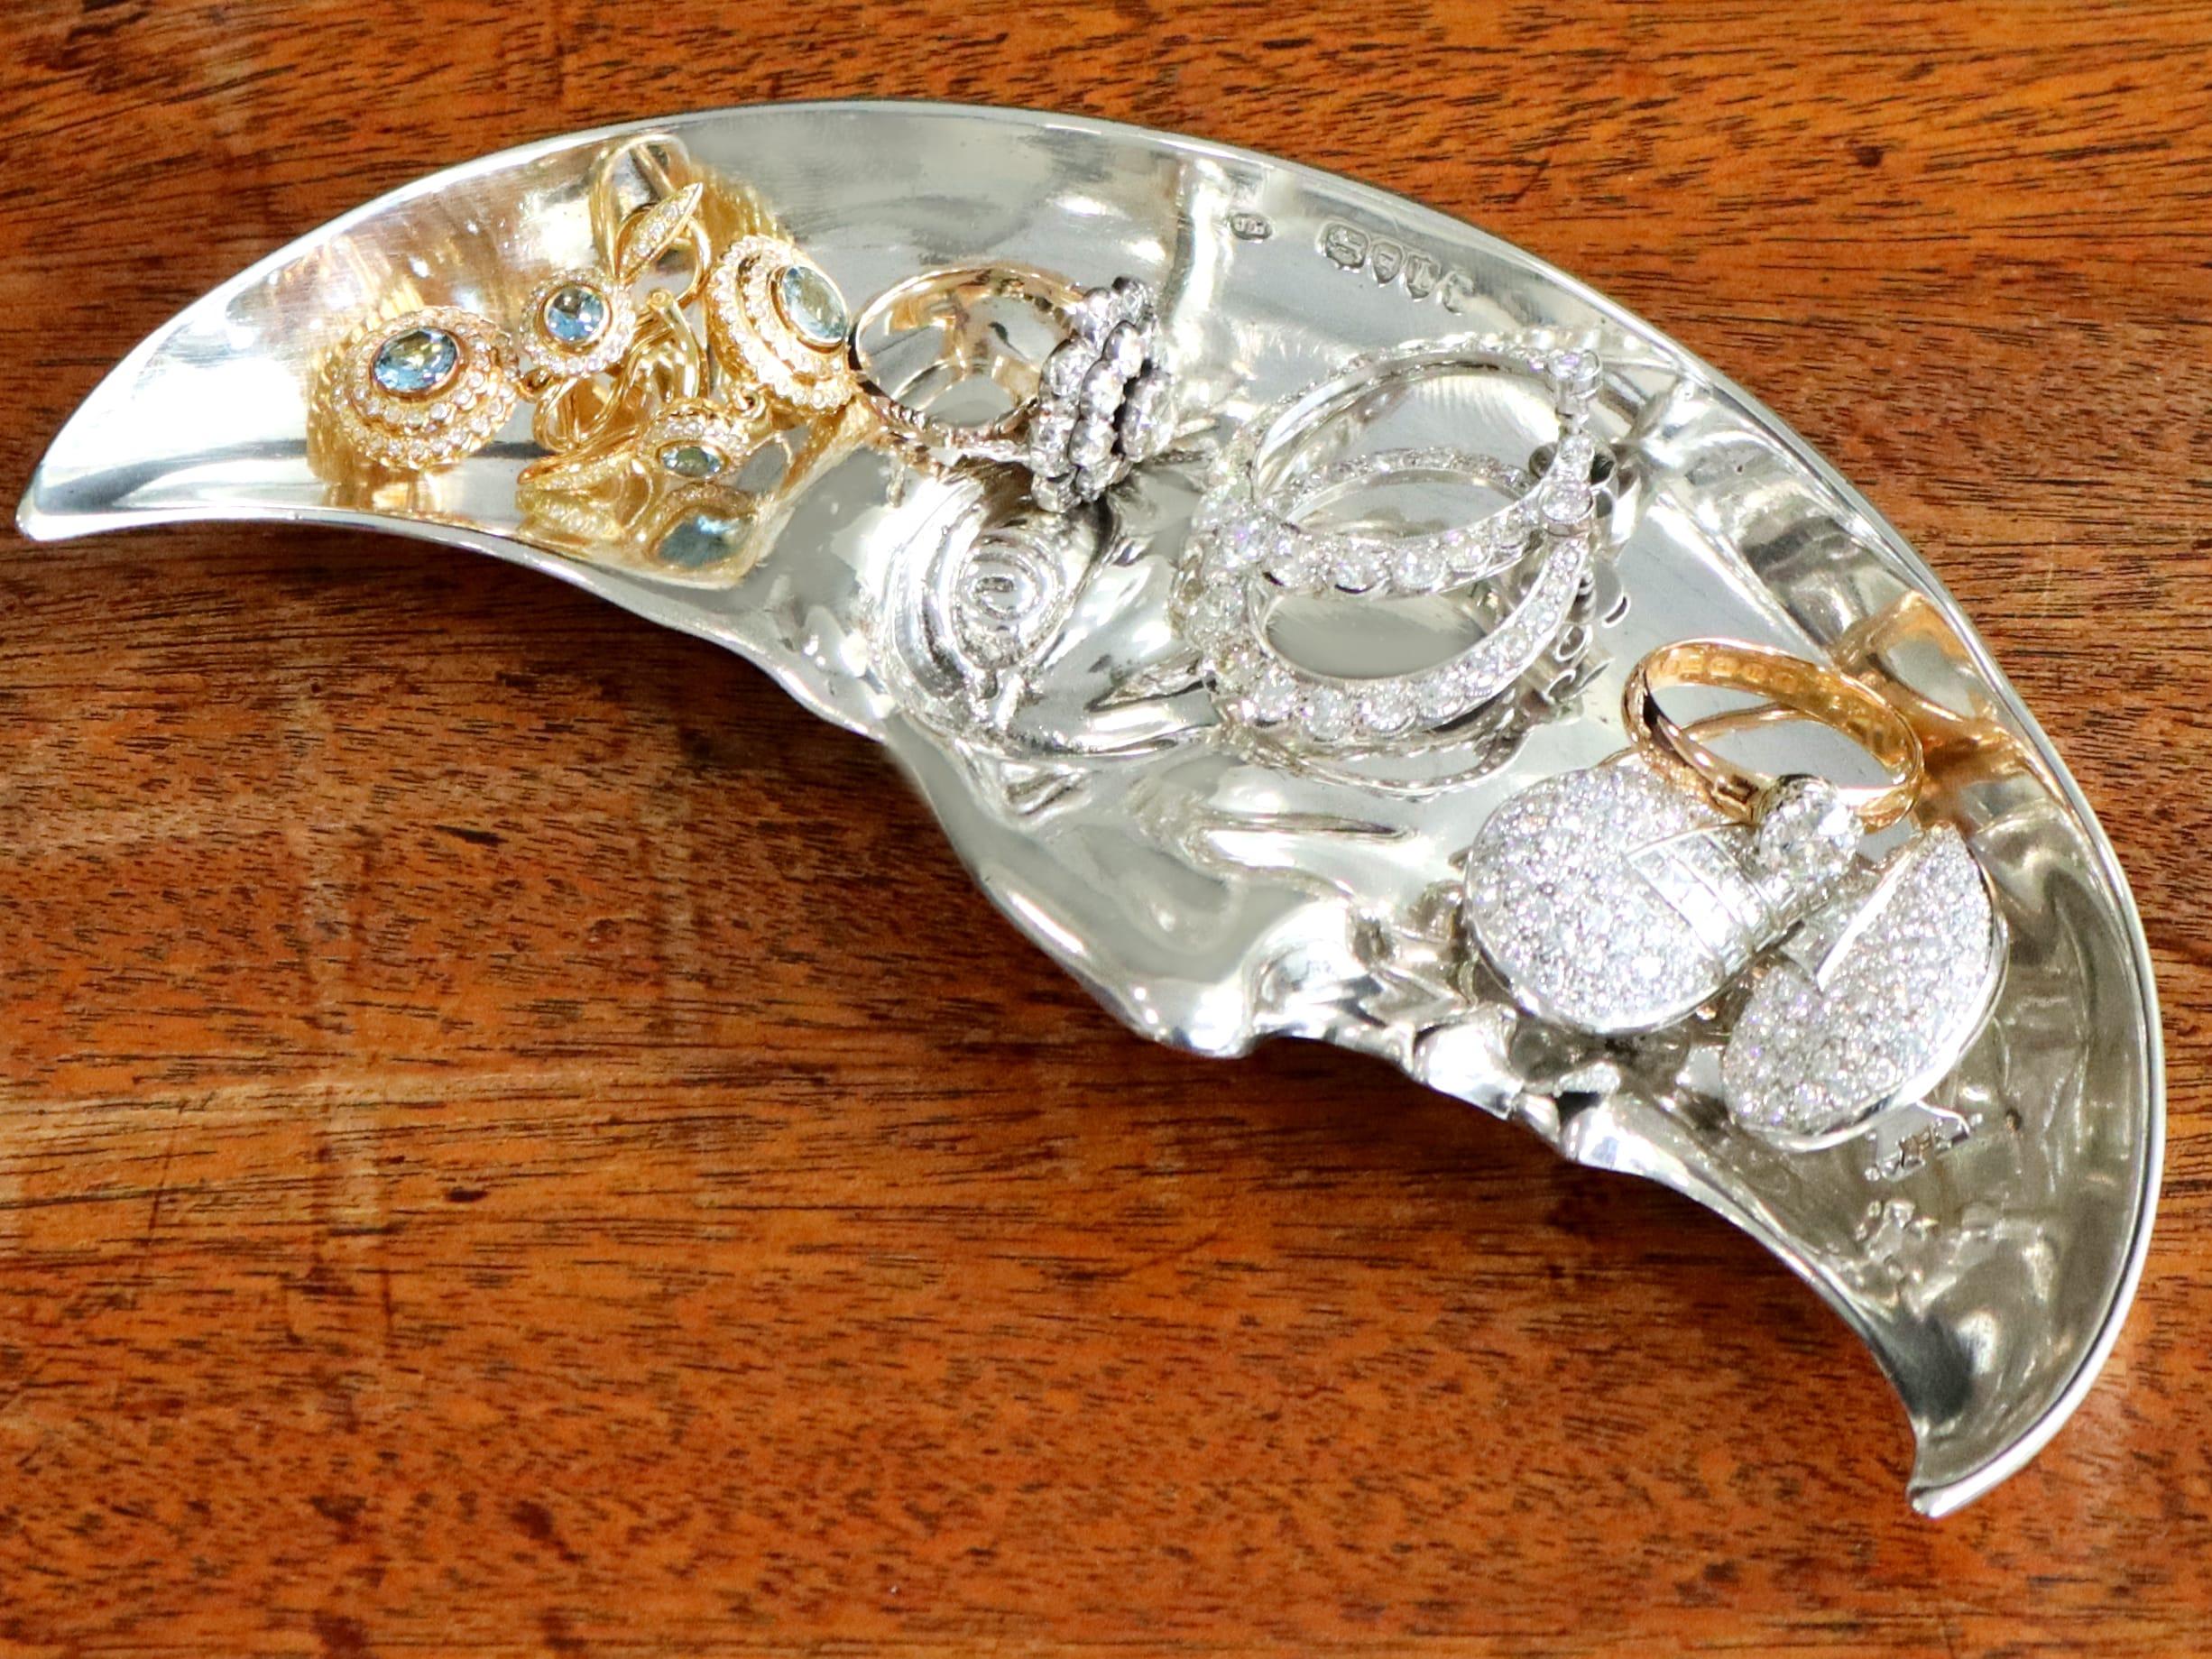 An exceptional, fine and impressive antique Victorian English sterling silver crescent moon dish/trinket tray; an addition to our diverse ornamental silverware collection

This exceptional and rare antique Victorian cast sterling silver trinket tray